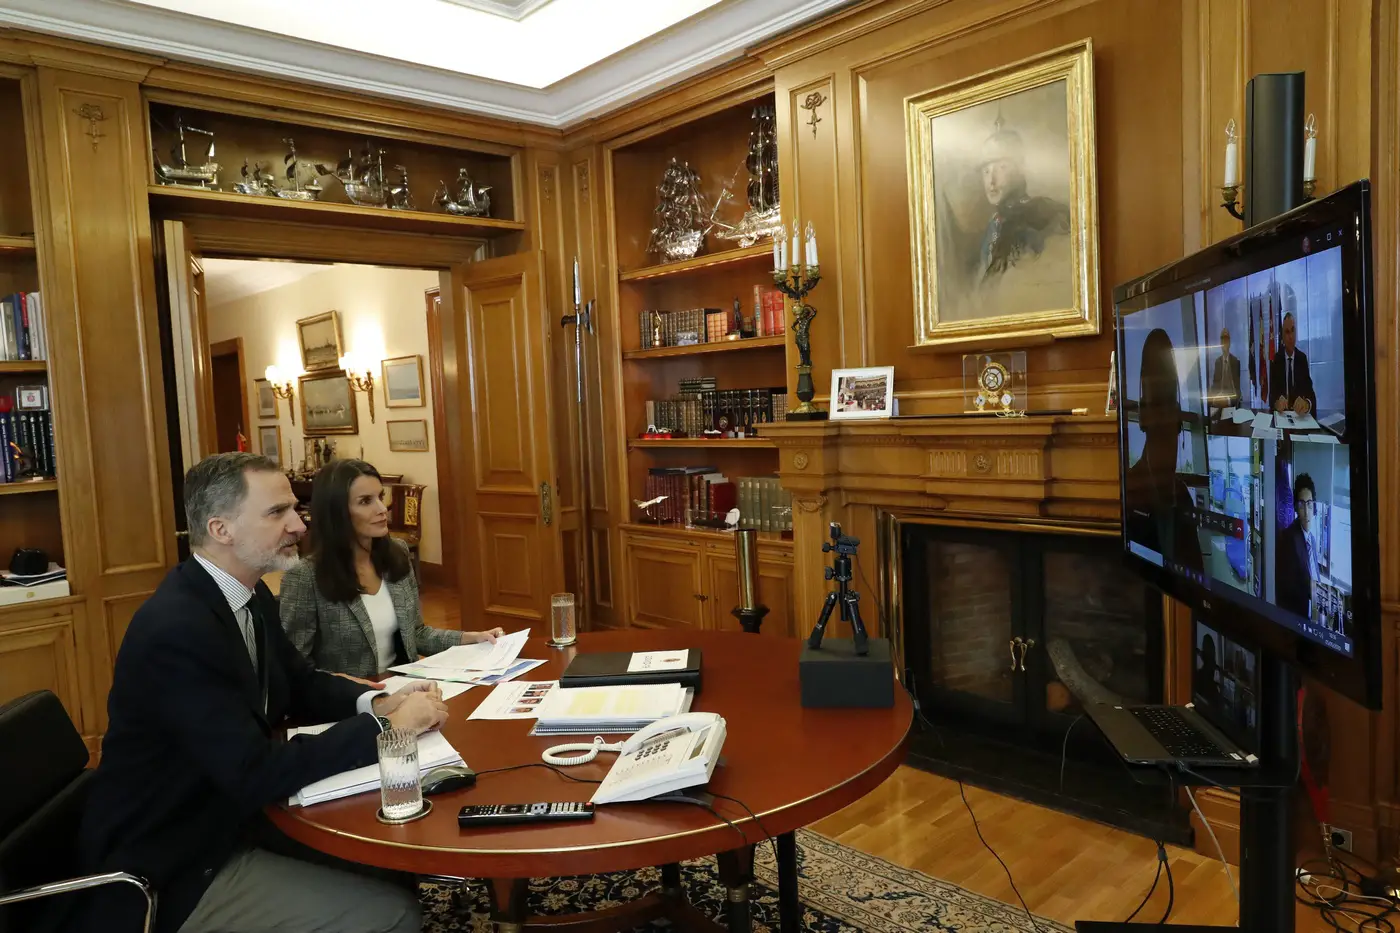 King Felipe and Queen Letizia then held a meeting with Municipal Transport Company of Madrid